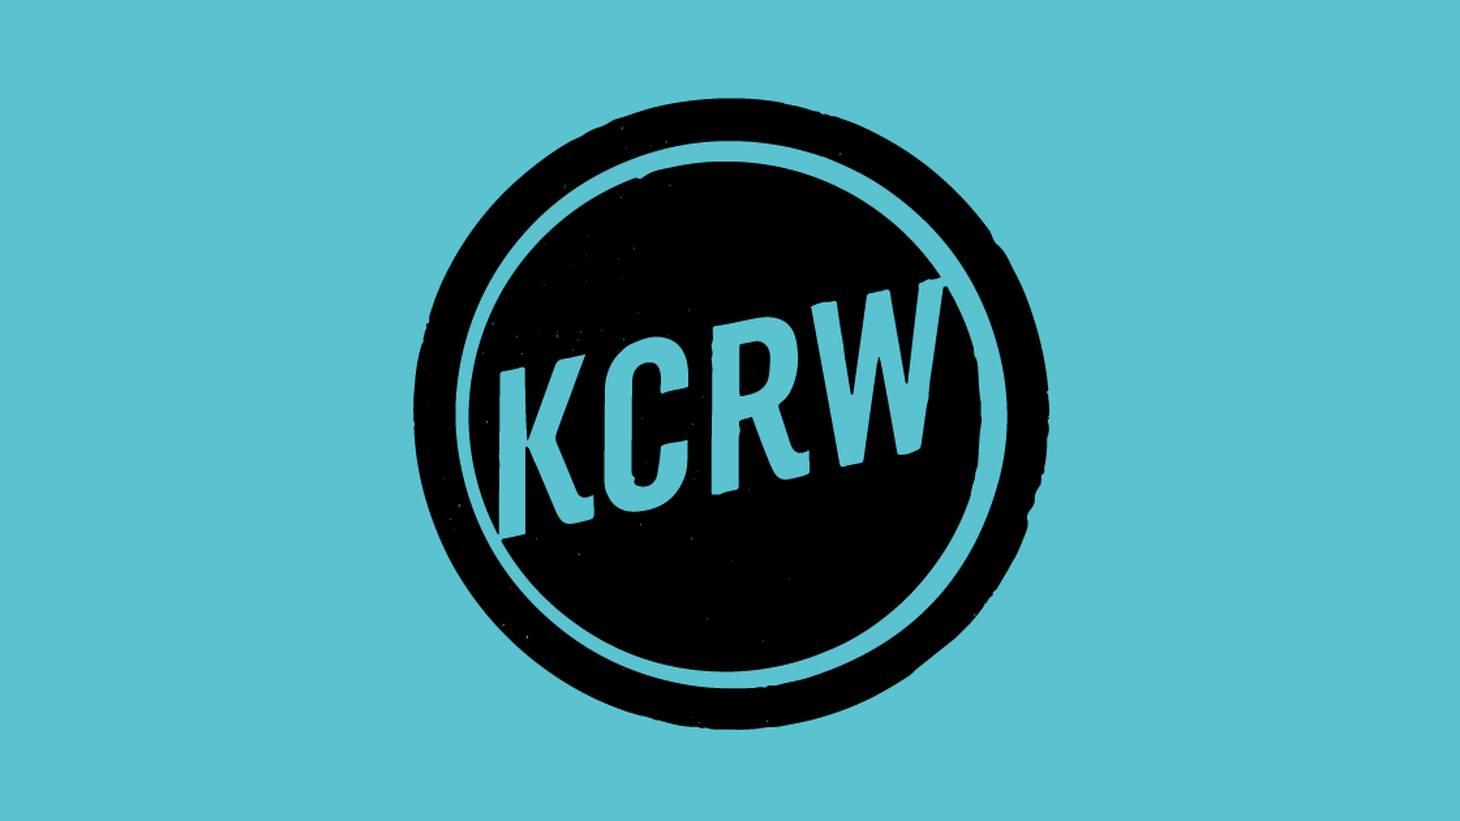 "All Things Considered" on KCRW 89.9 FM